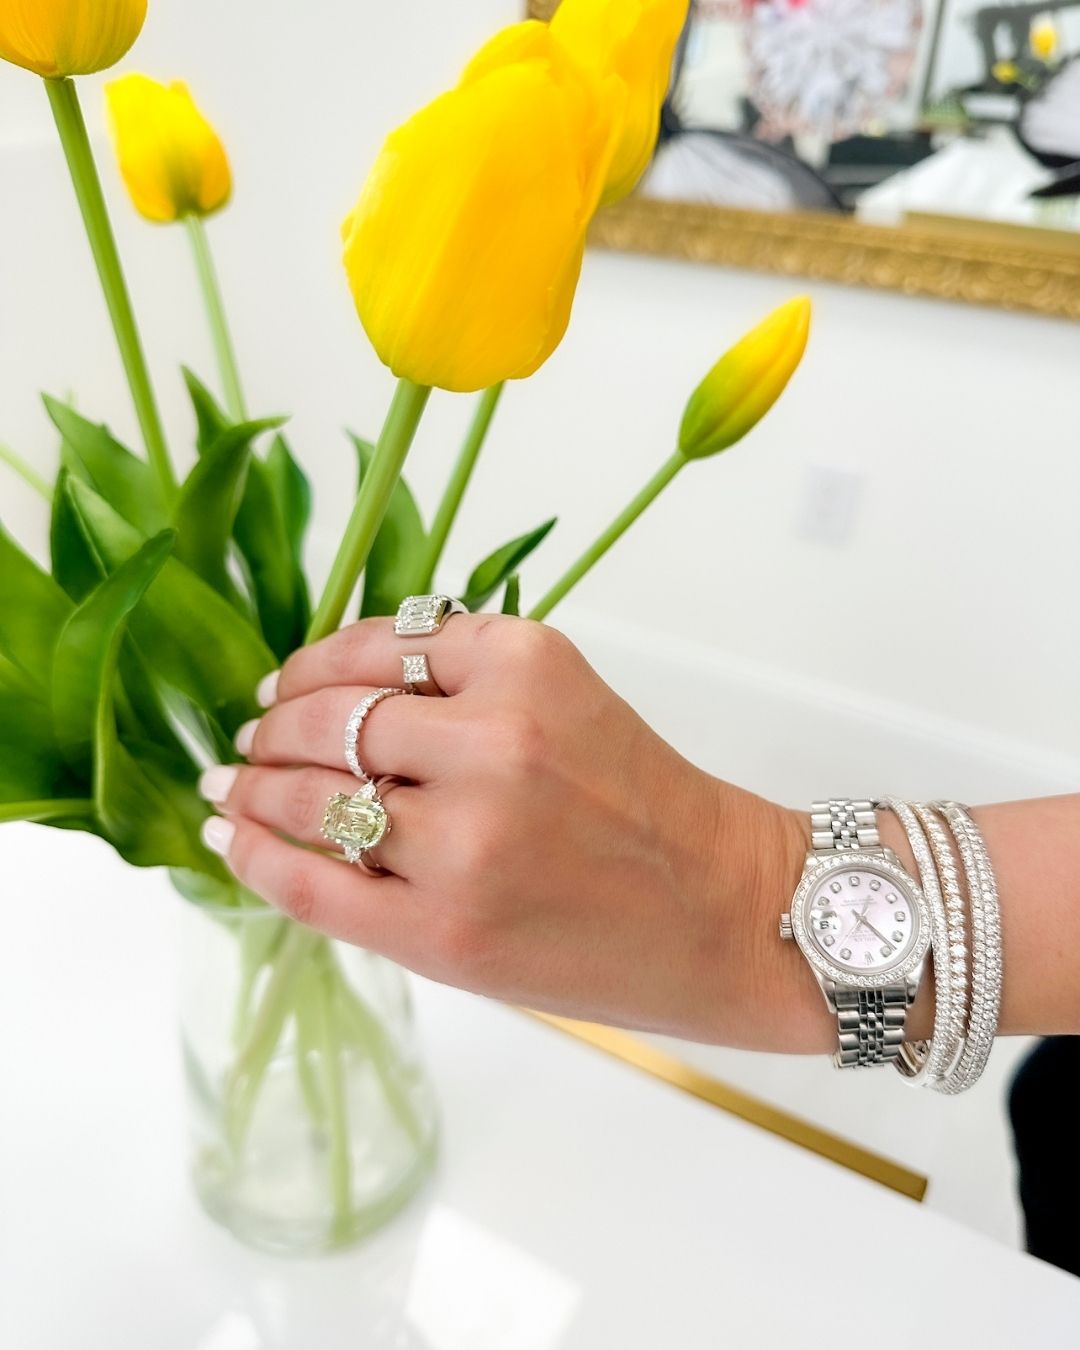 Lady hand with diamond rings, watch and bracelets holding a yellow flower